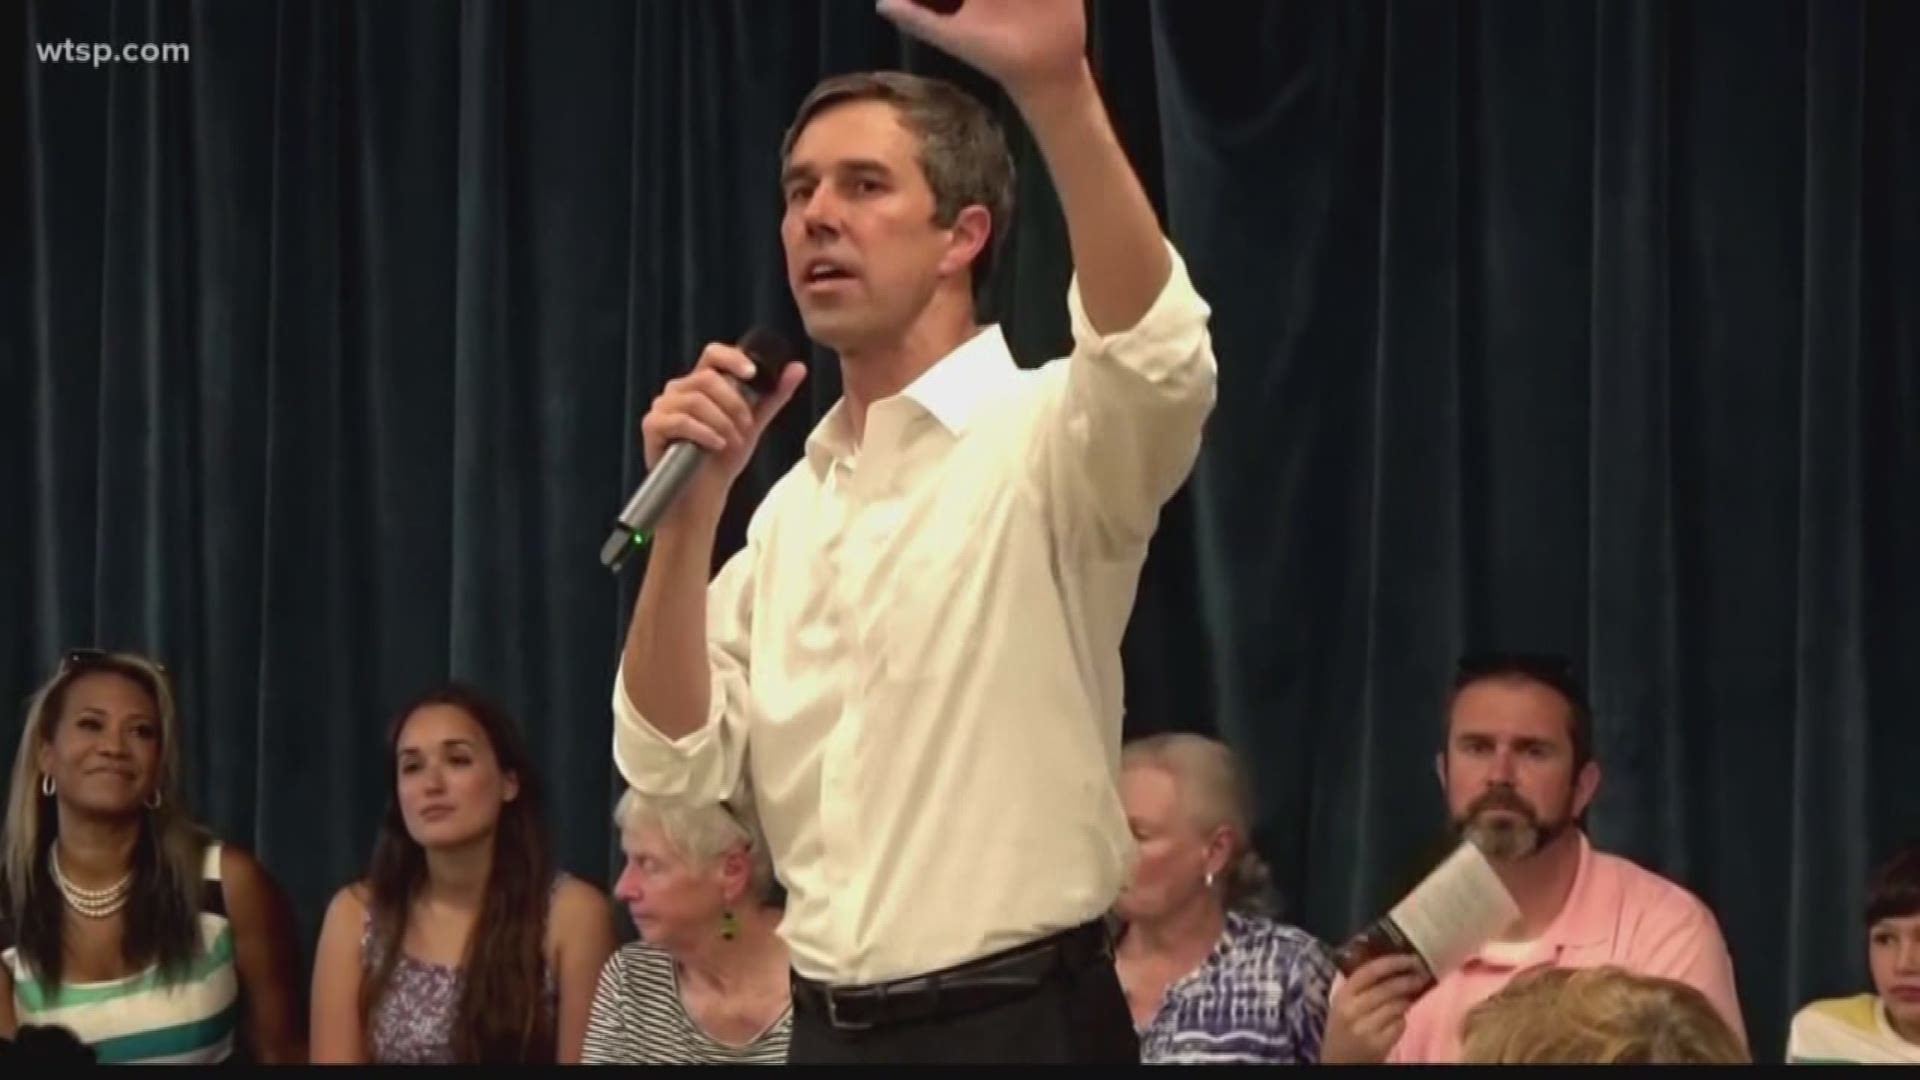 Beto O'Rourke will be at Brew Bus holding a round table with Veterans ahead of the first Democratic debate in Miami. https://on.wtsp.com/31UfKto